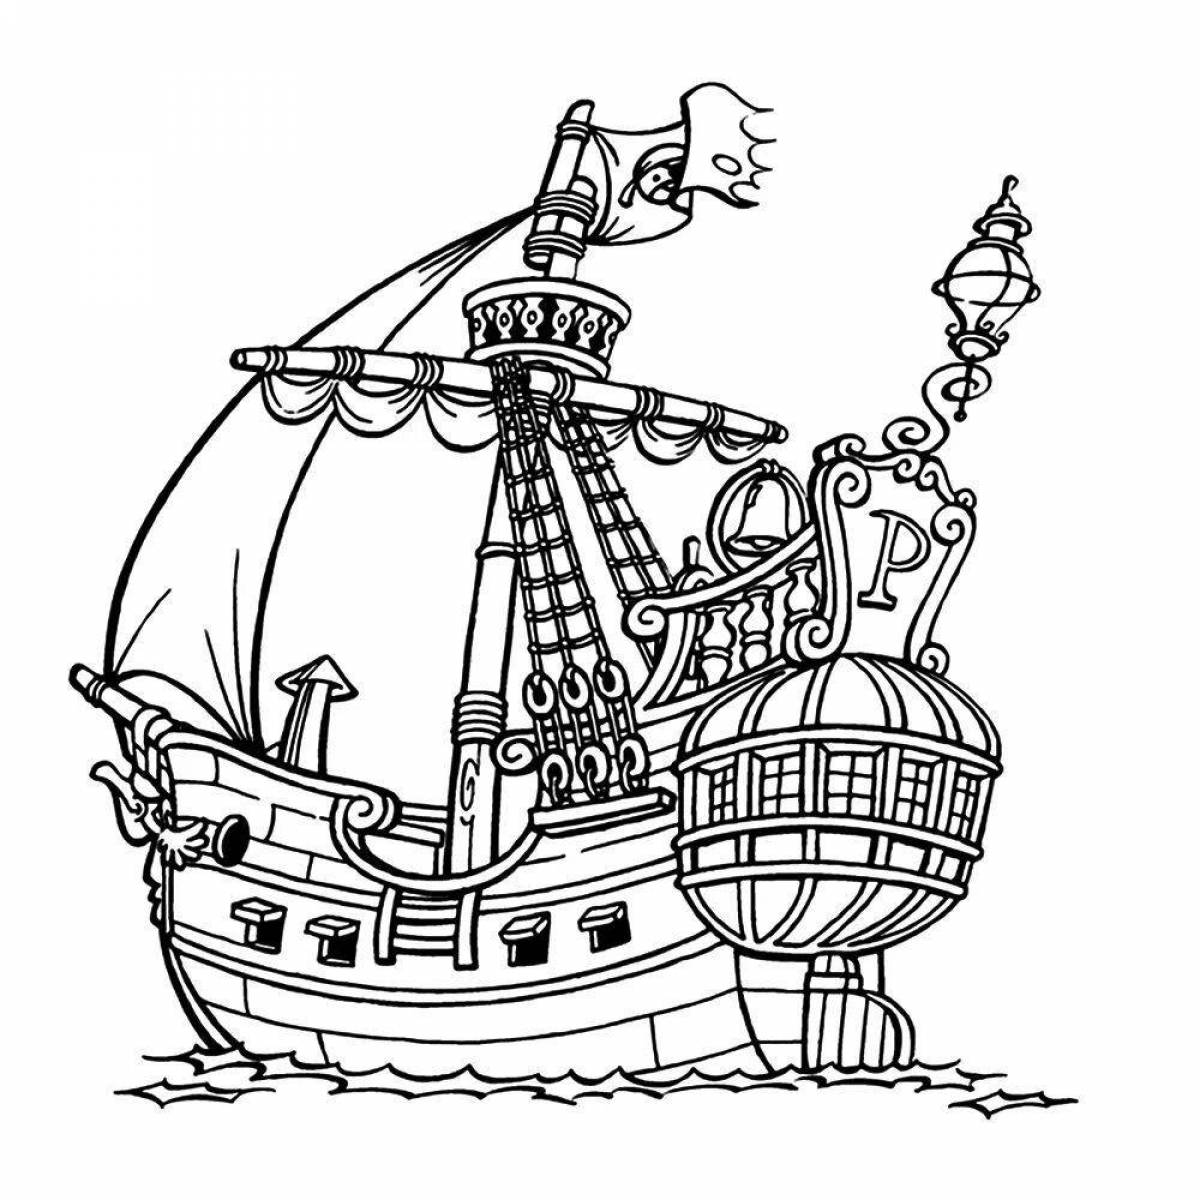 Adventure pirate ship coloring book for kids